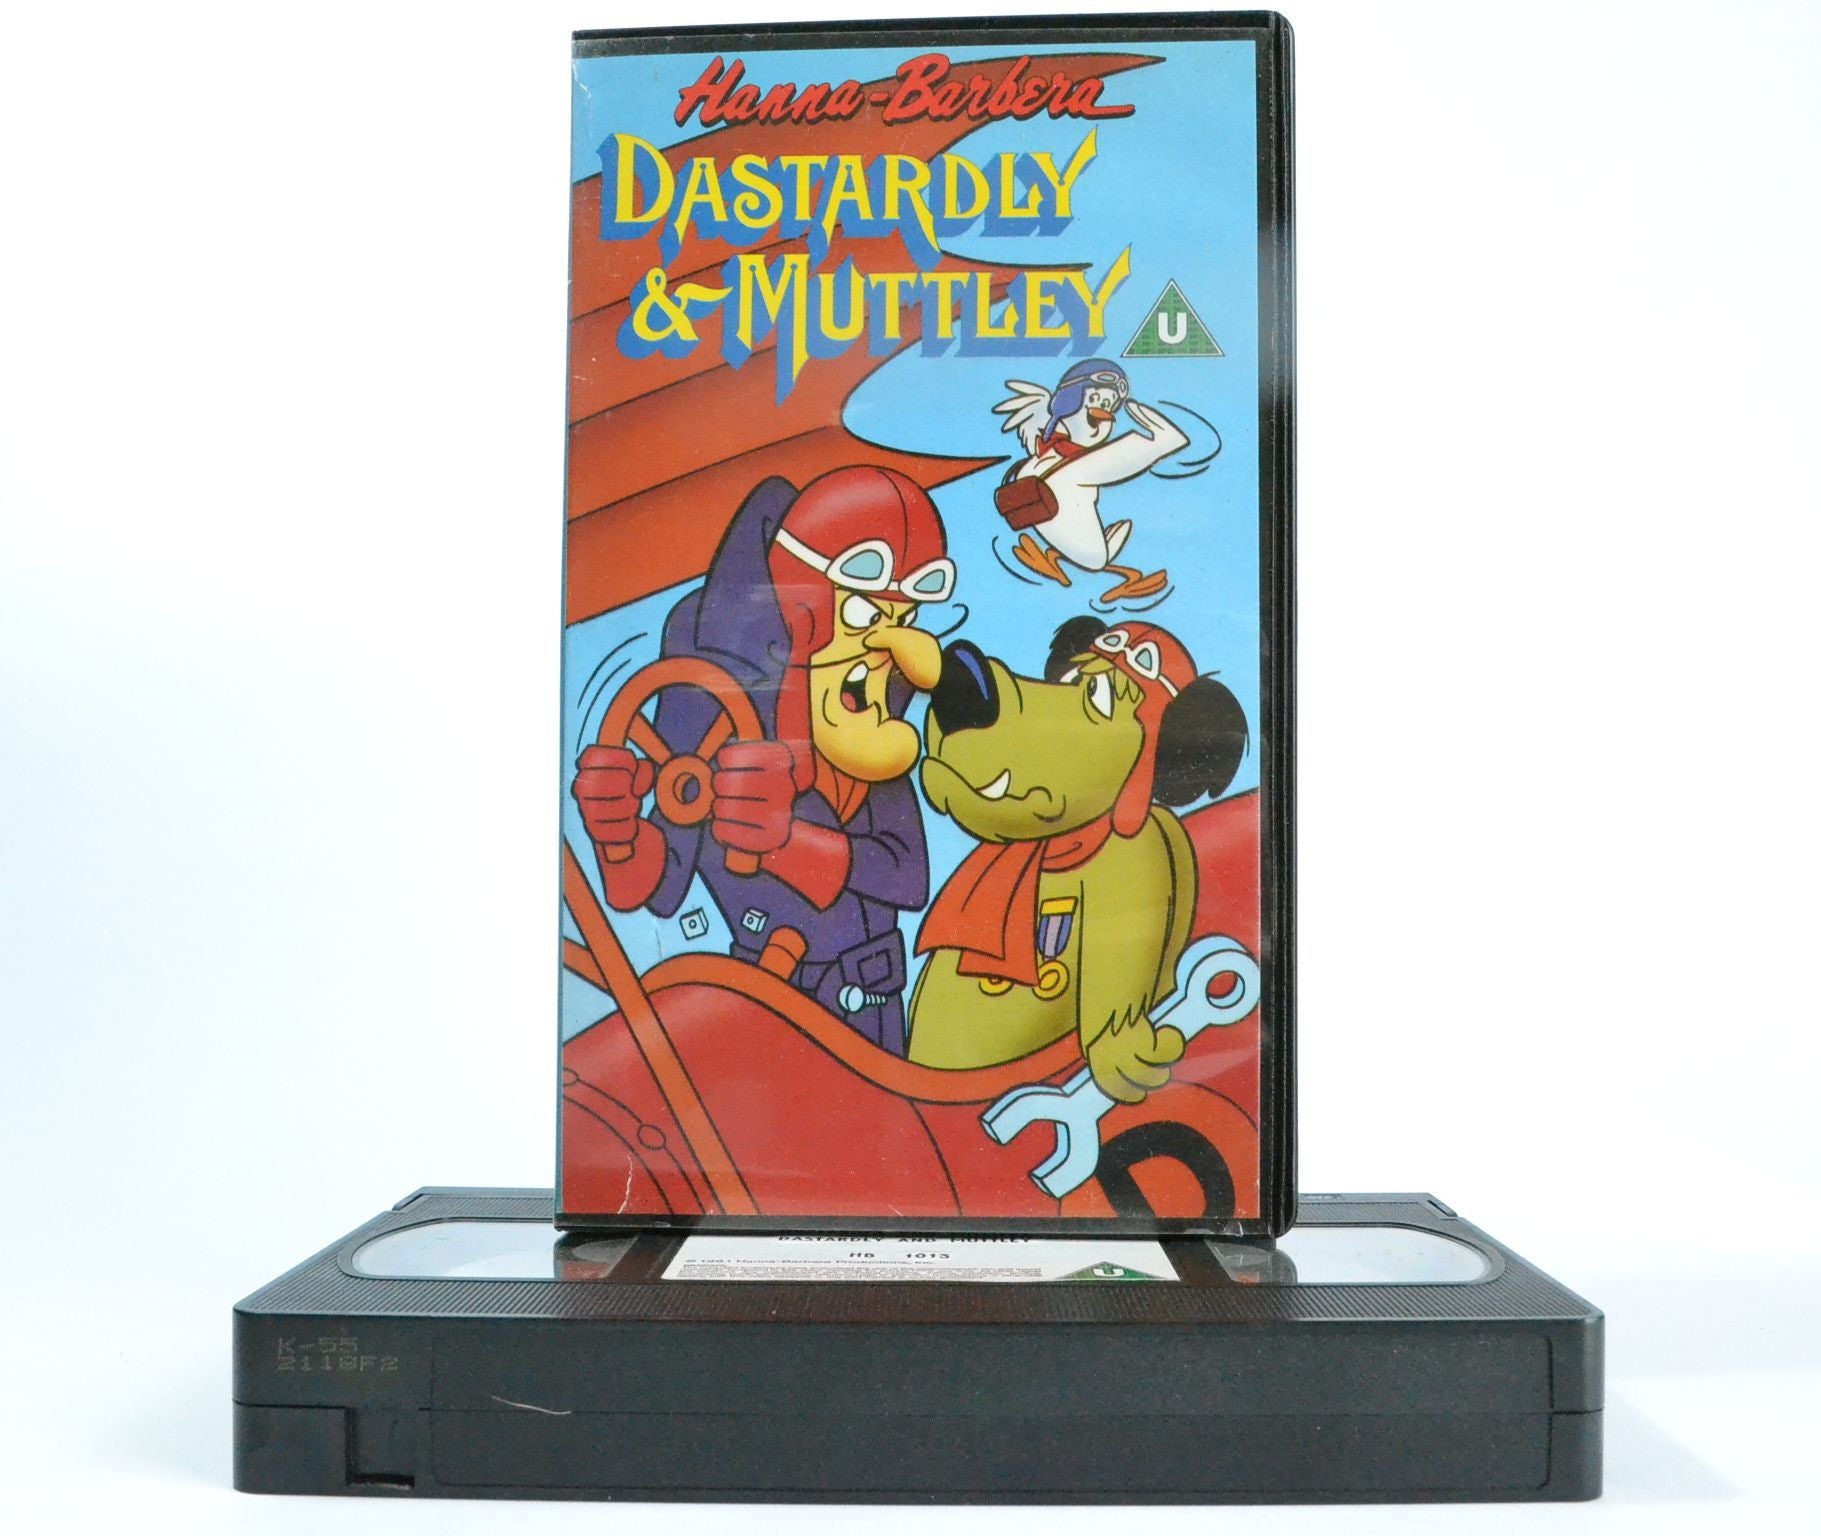 Dastardly & Muttley: 8 Of The Best - Barn Stormers [Children’s Race Animation] VHS-